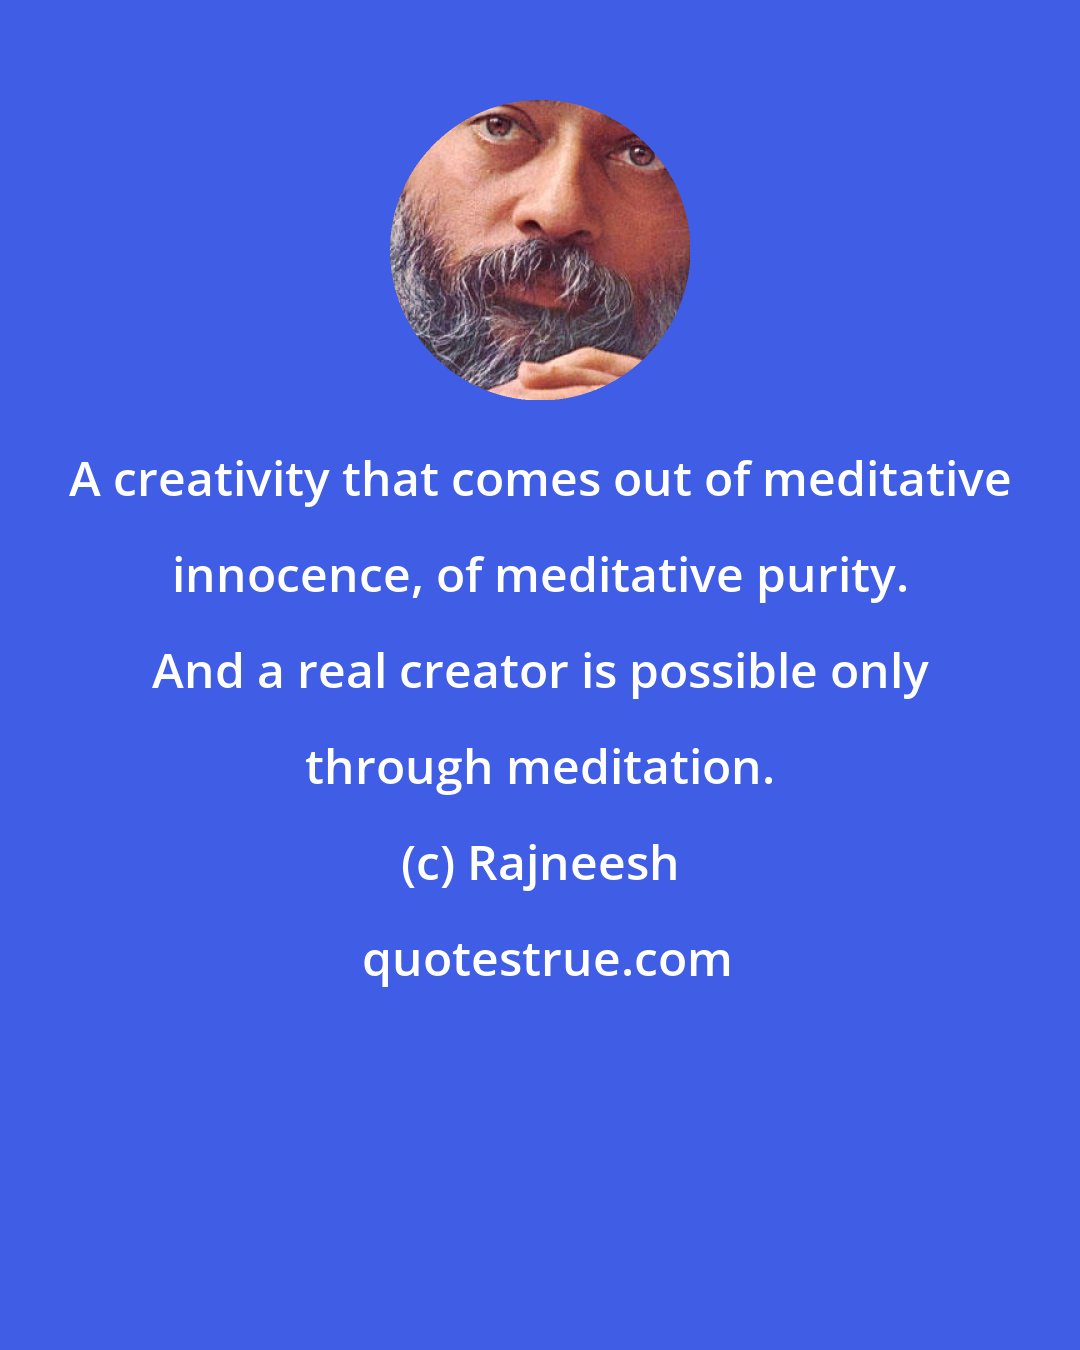 Rajneesh: A creativity that comes out of meditative innocence, of meditative purity. And a real creator is possible only through meditation.